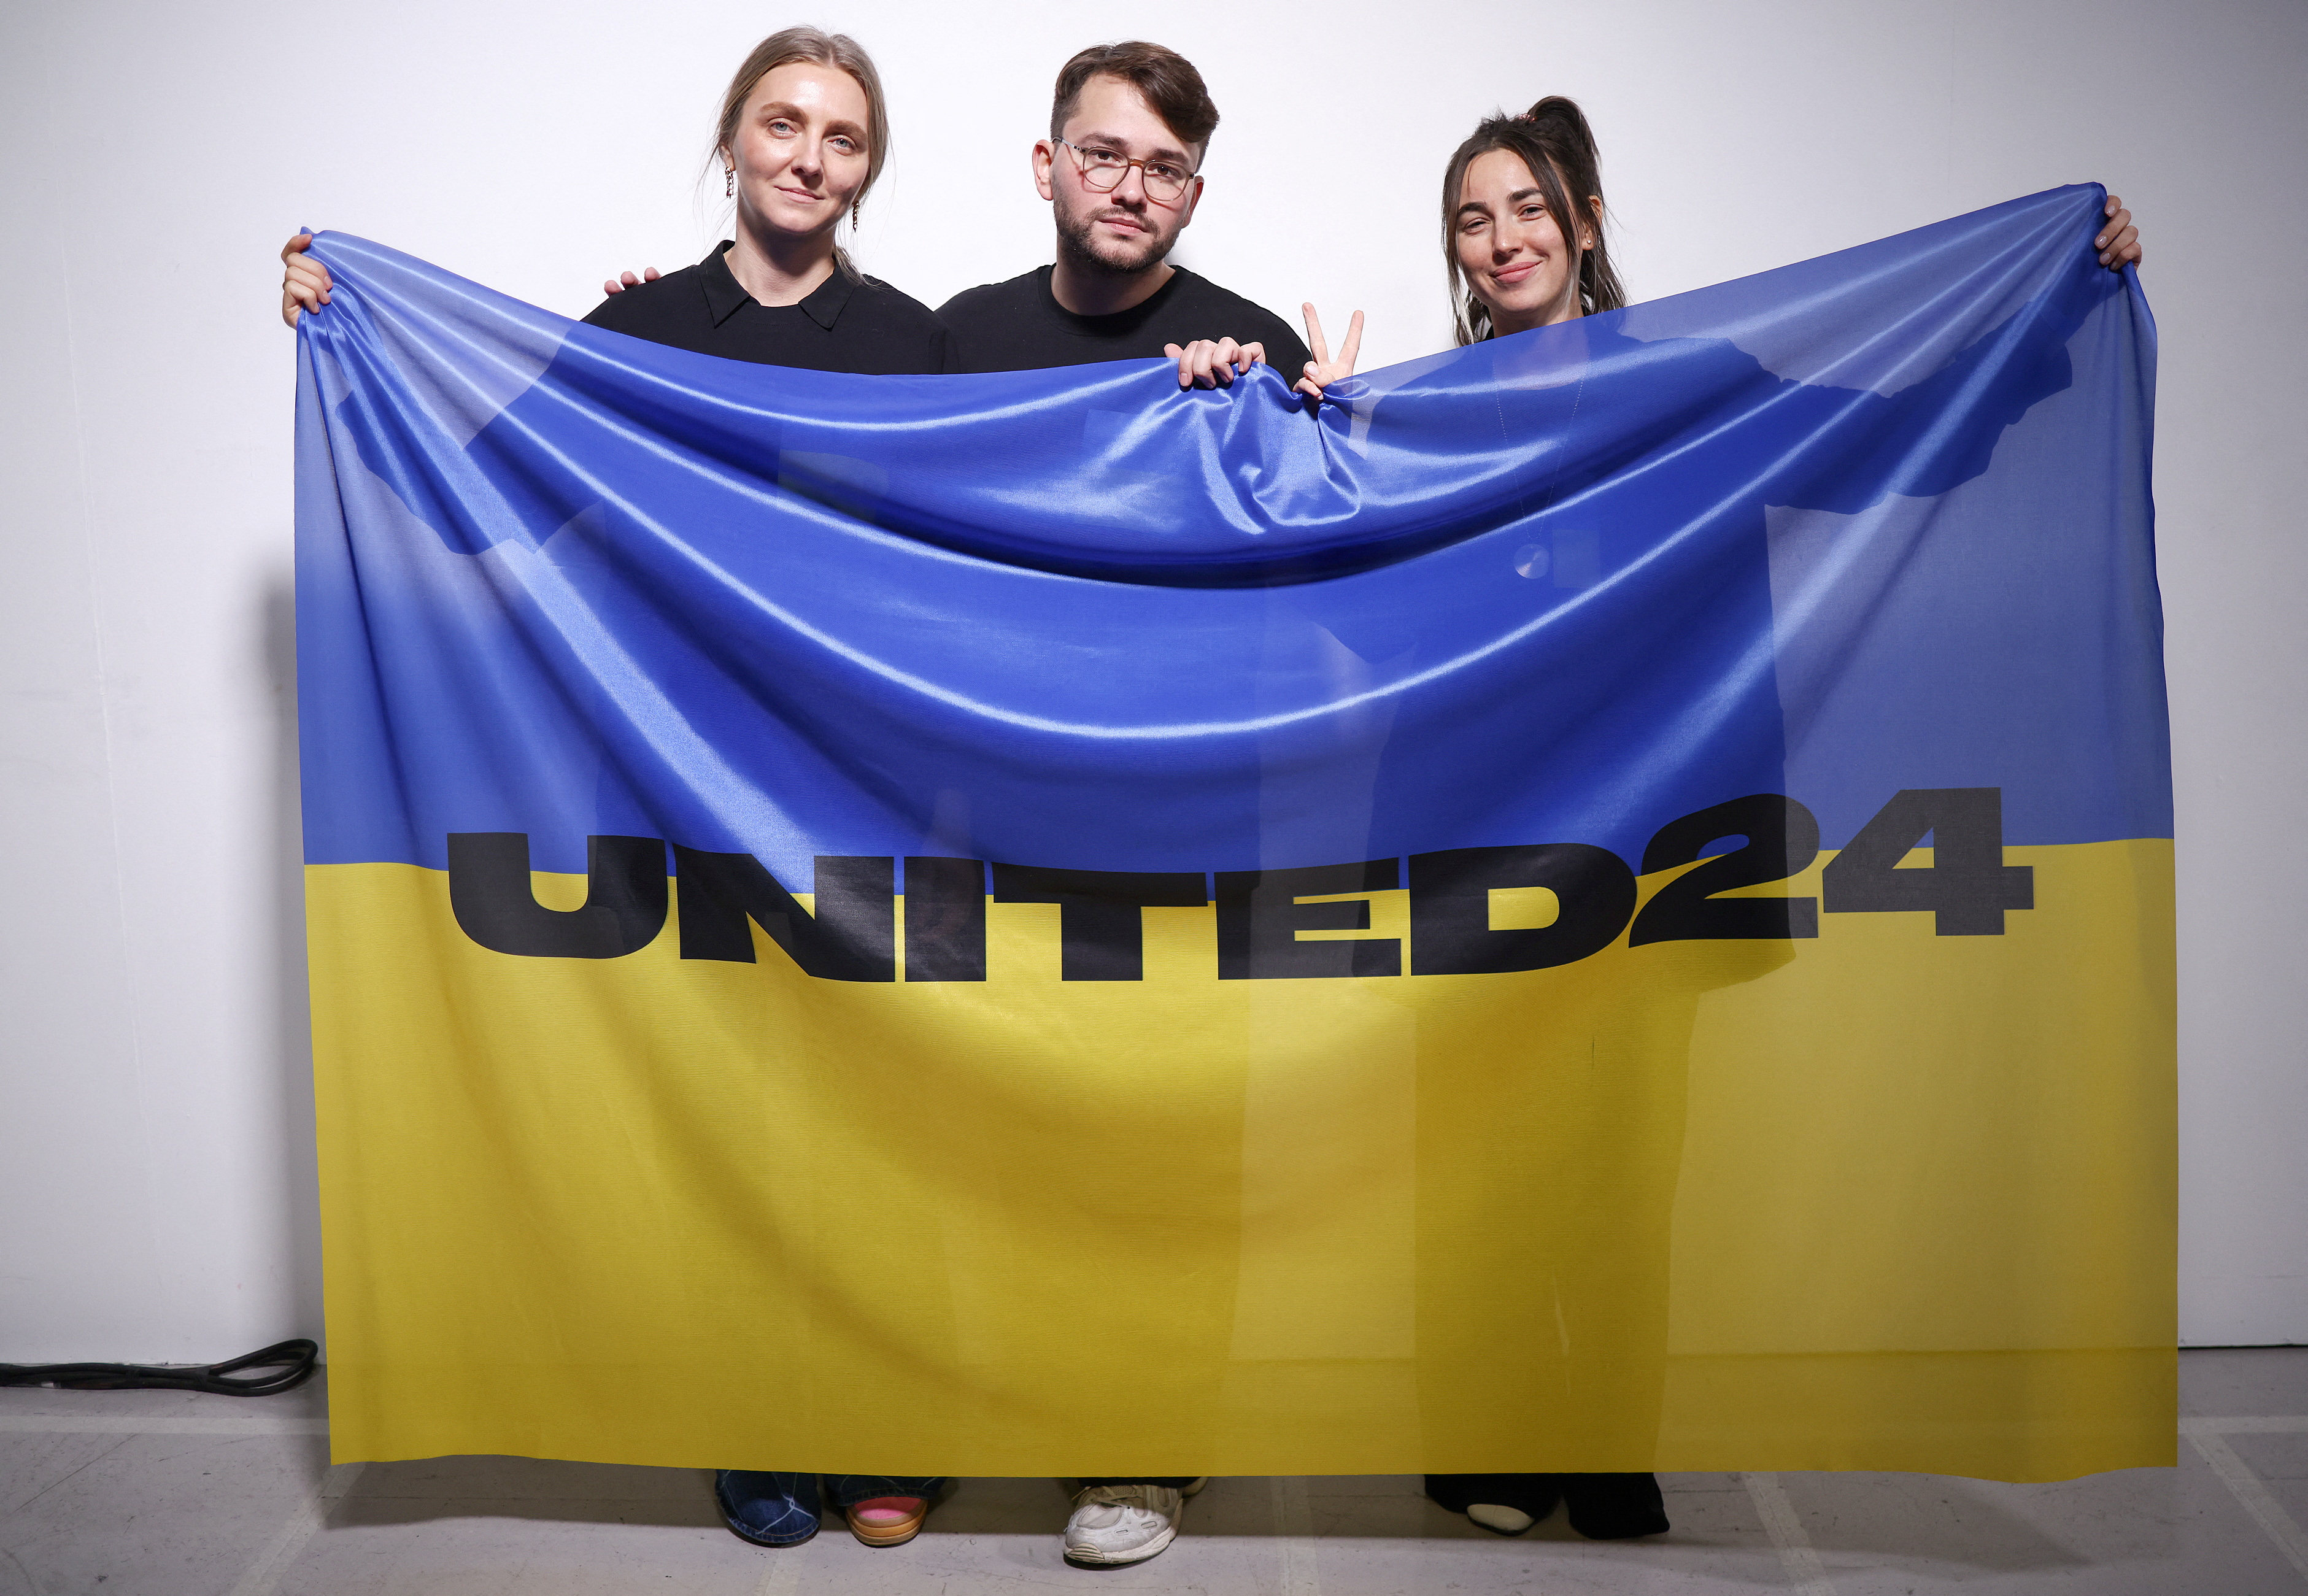 Ukrainian fashion designers Ksenia Schnaider, Ivan Frolov and Julie Paskal pose backstage with a Ukraine flag ahead of the Ukraine Fashion Week show during which they presented their labels’ designs at London Fashion Week in Britain. Photo: Reuters